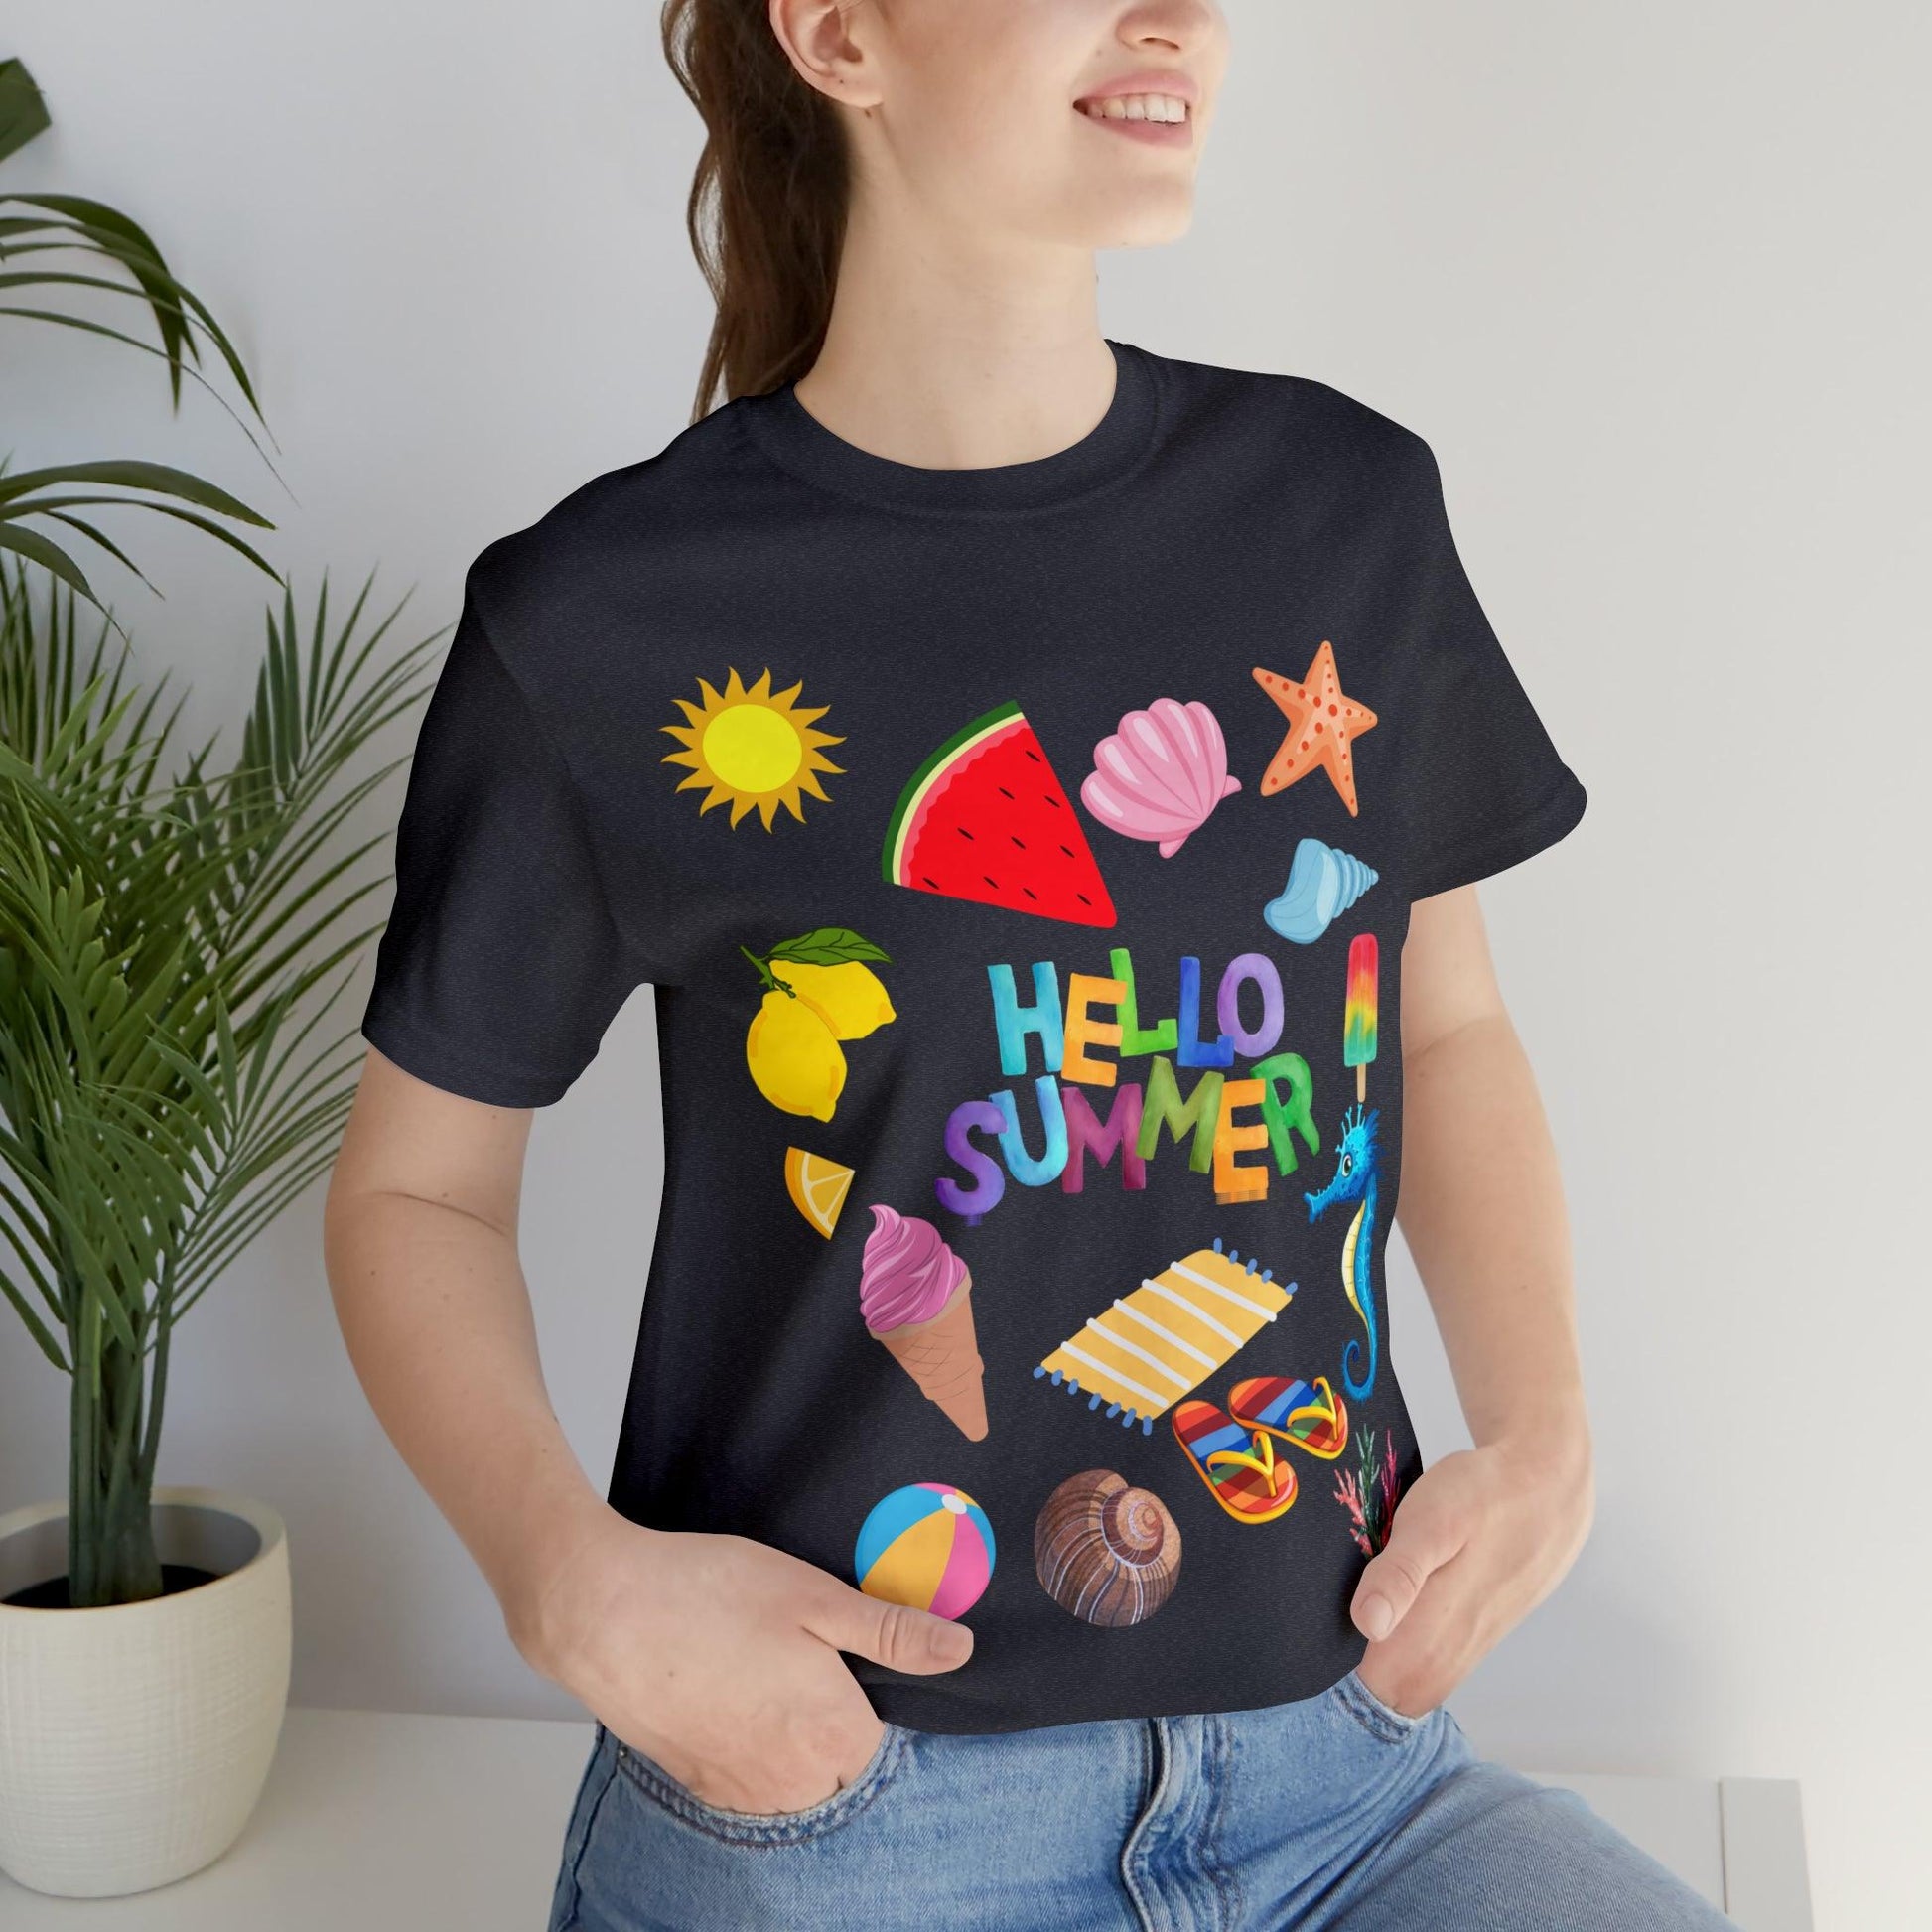 Hello Summer shirt, Funny Summer shirts for women and men, Summer Casual Top Tee - Giftsmojo